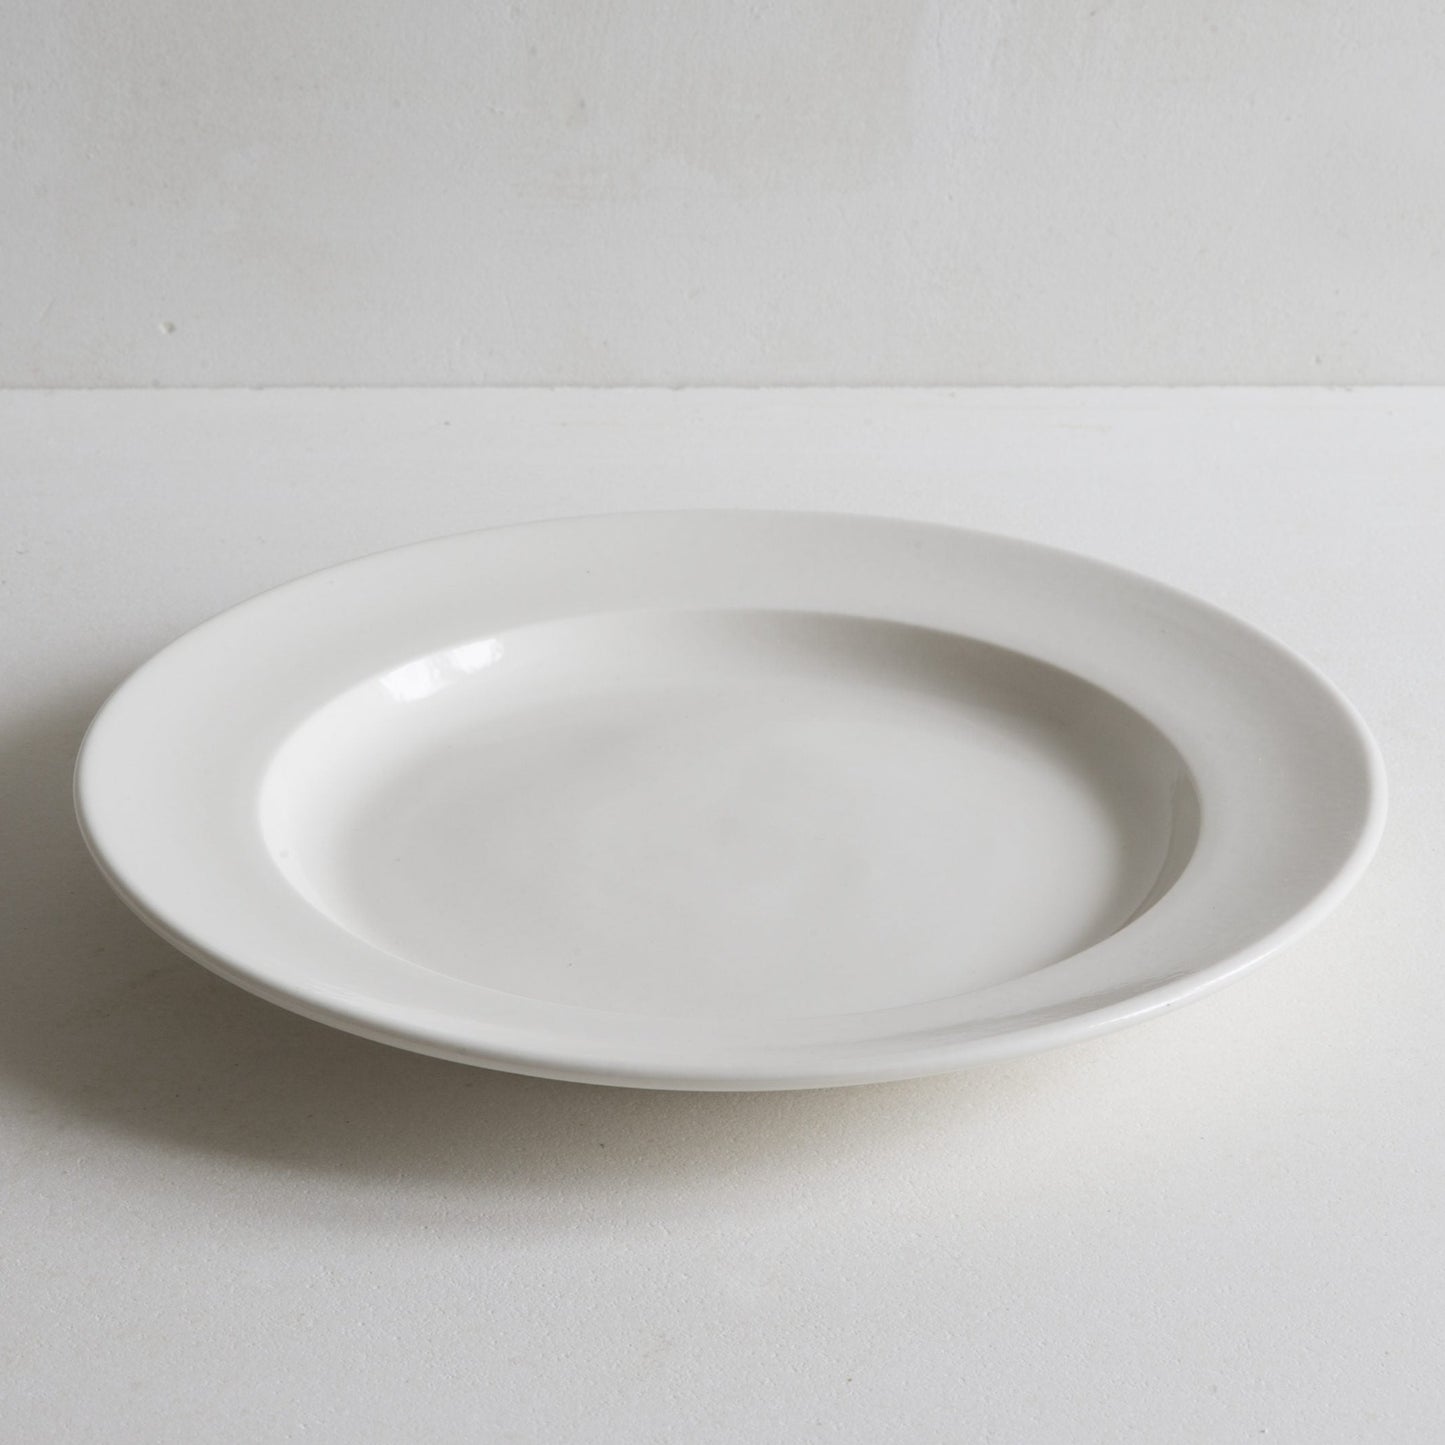 Classical Porcelain Dinner Plate 27cm Flat View